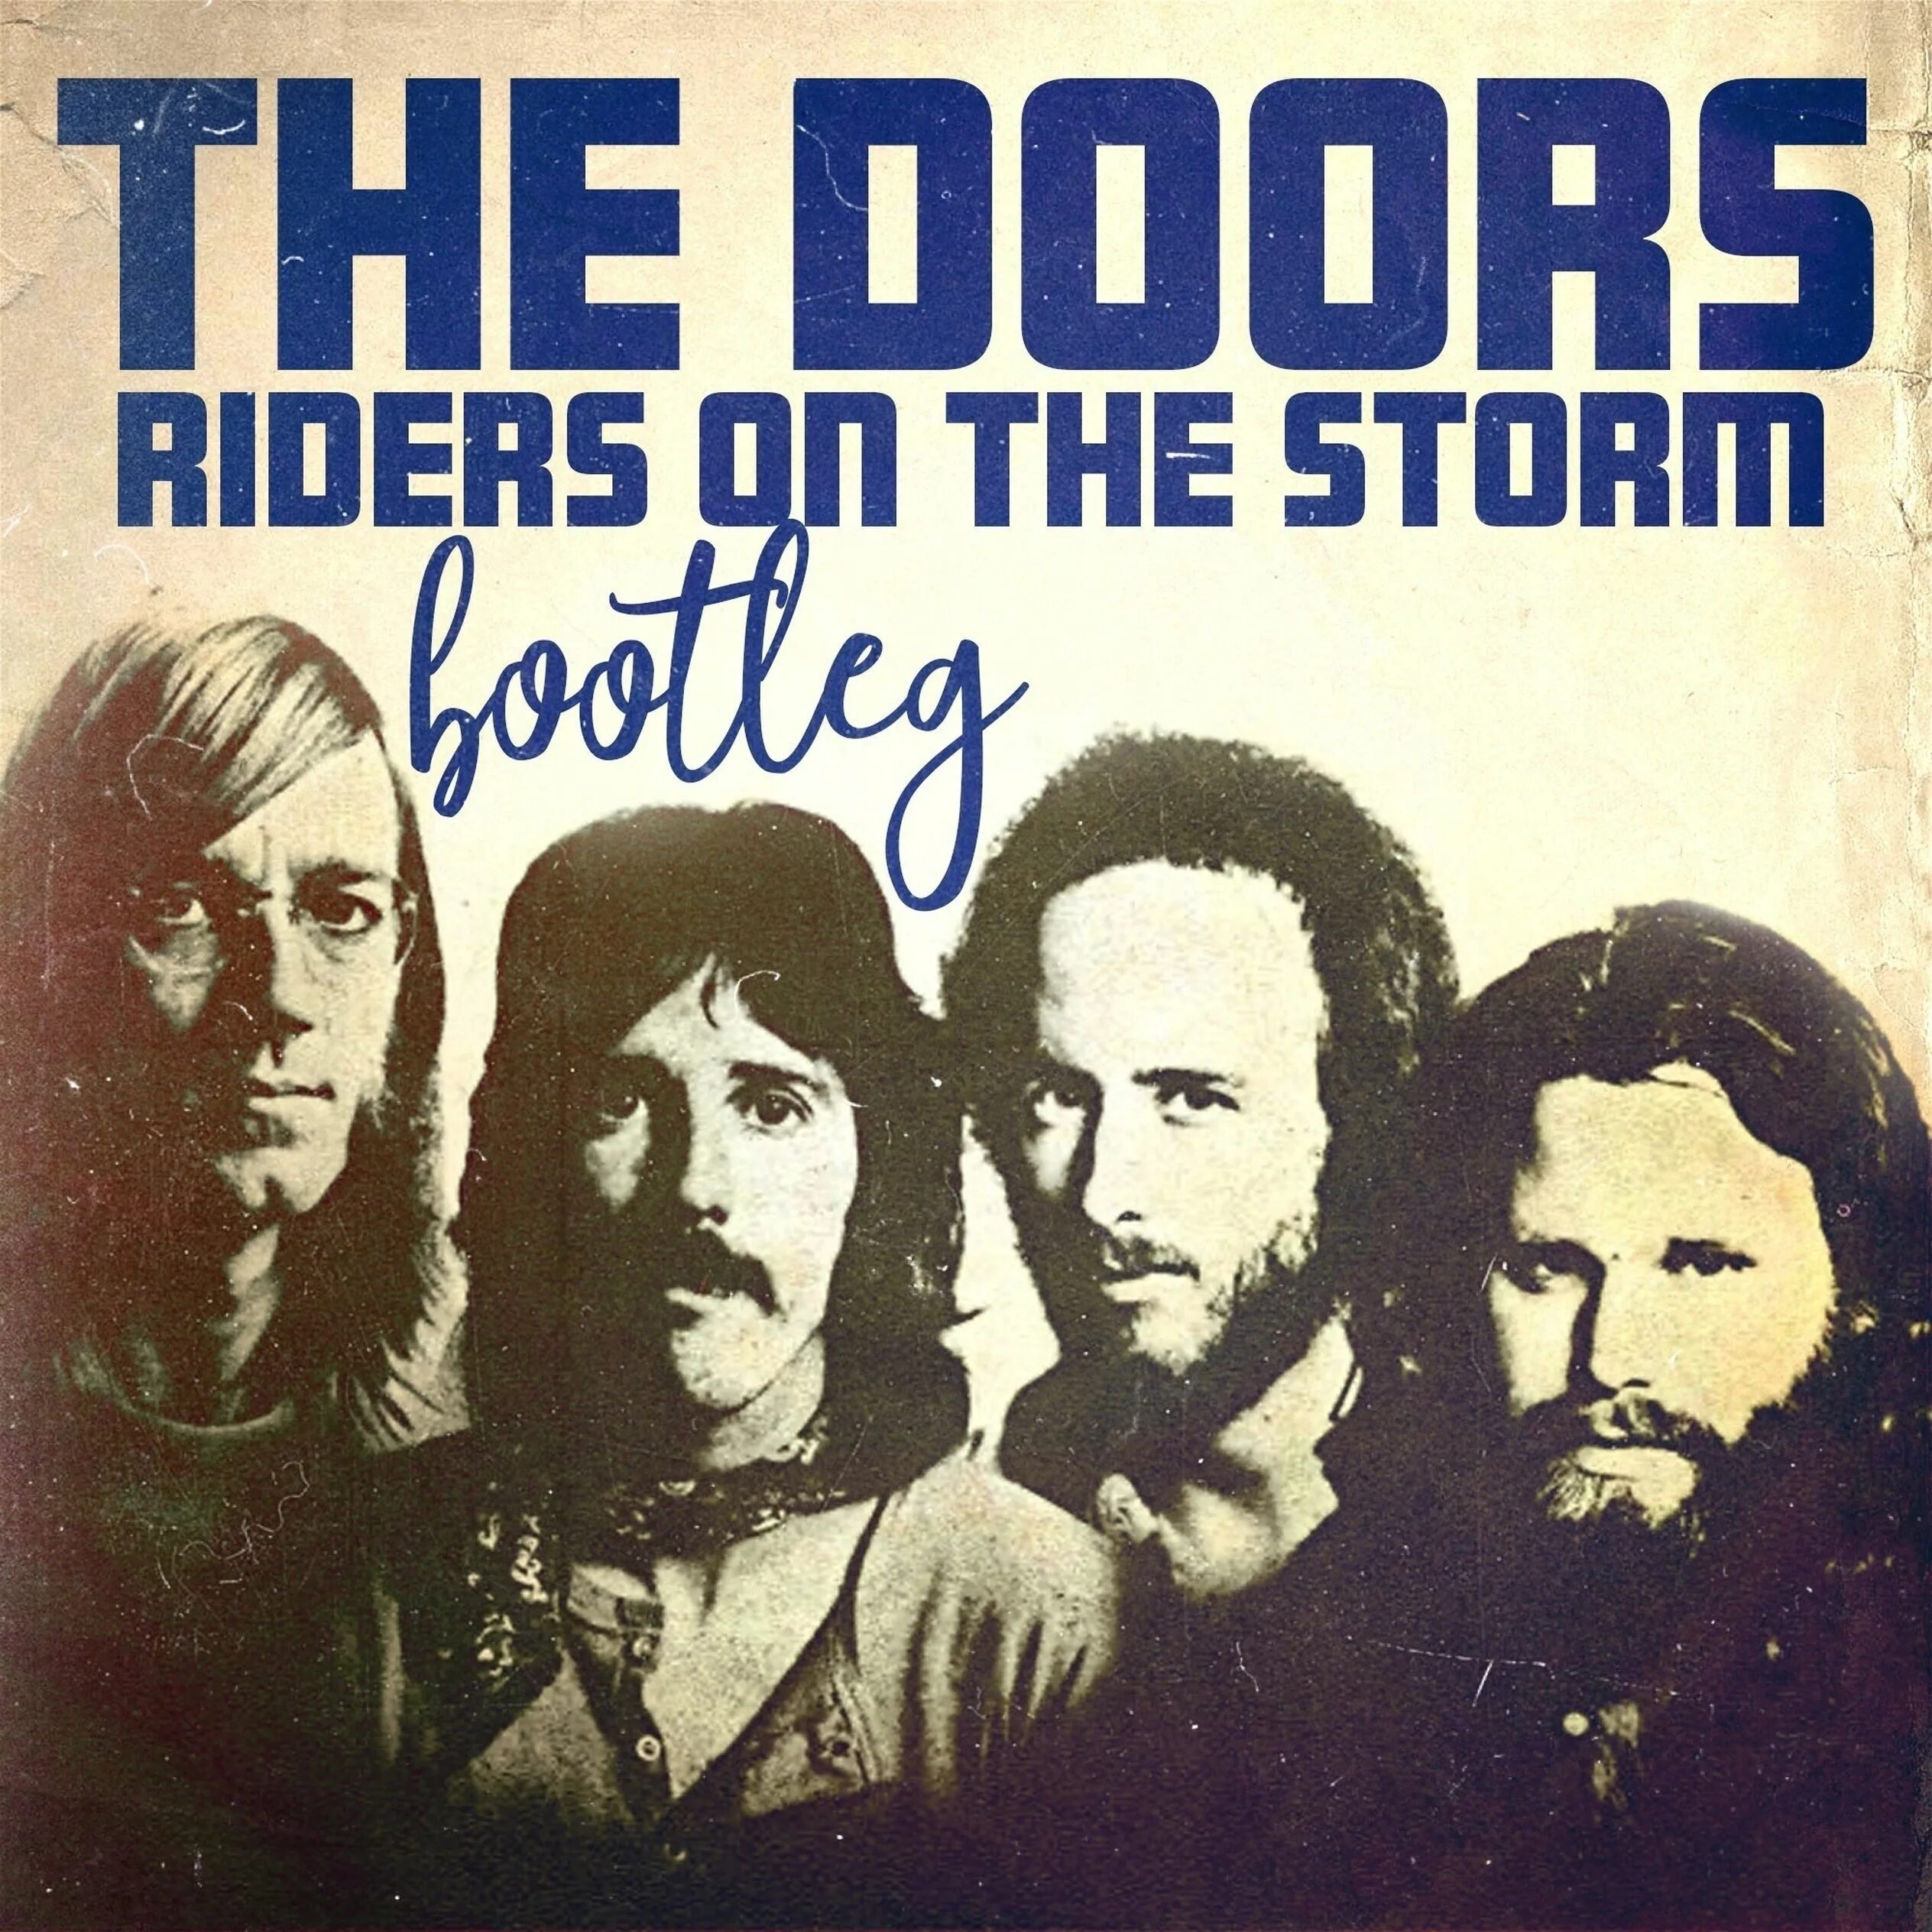 Riders on the storm snoop